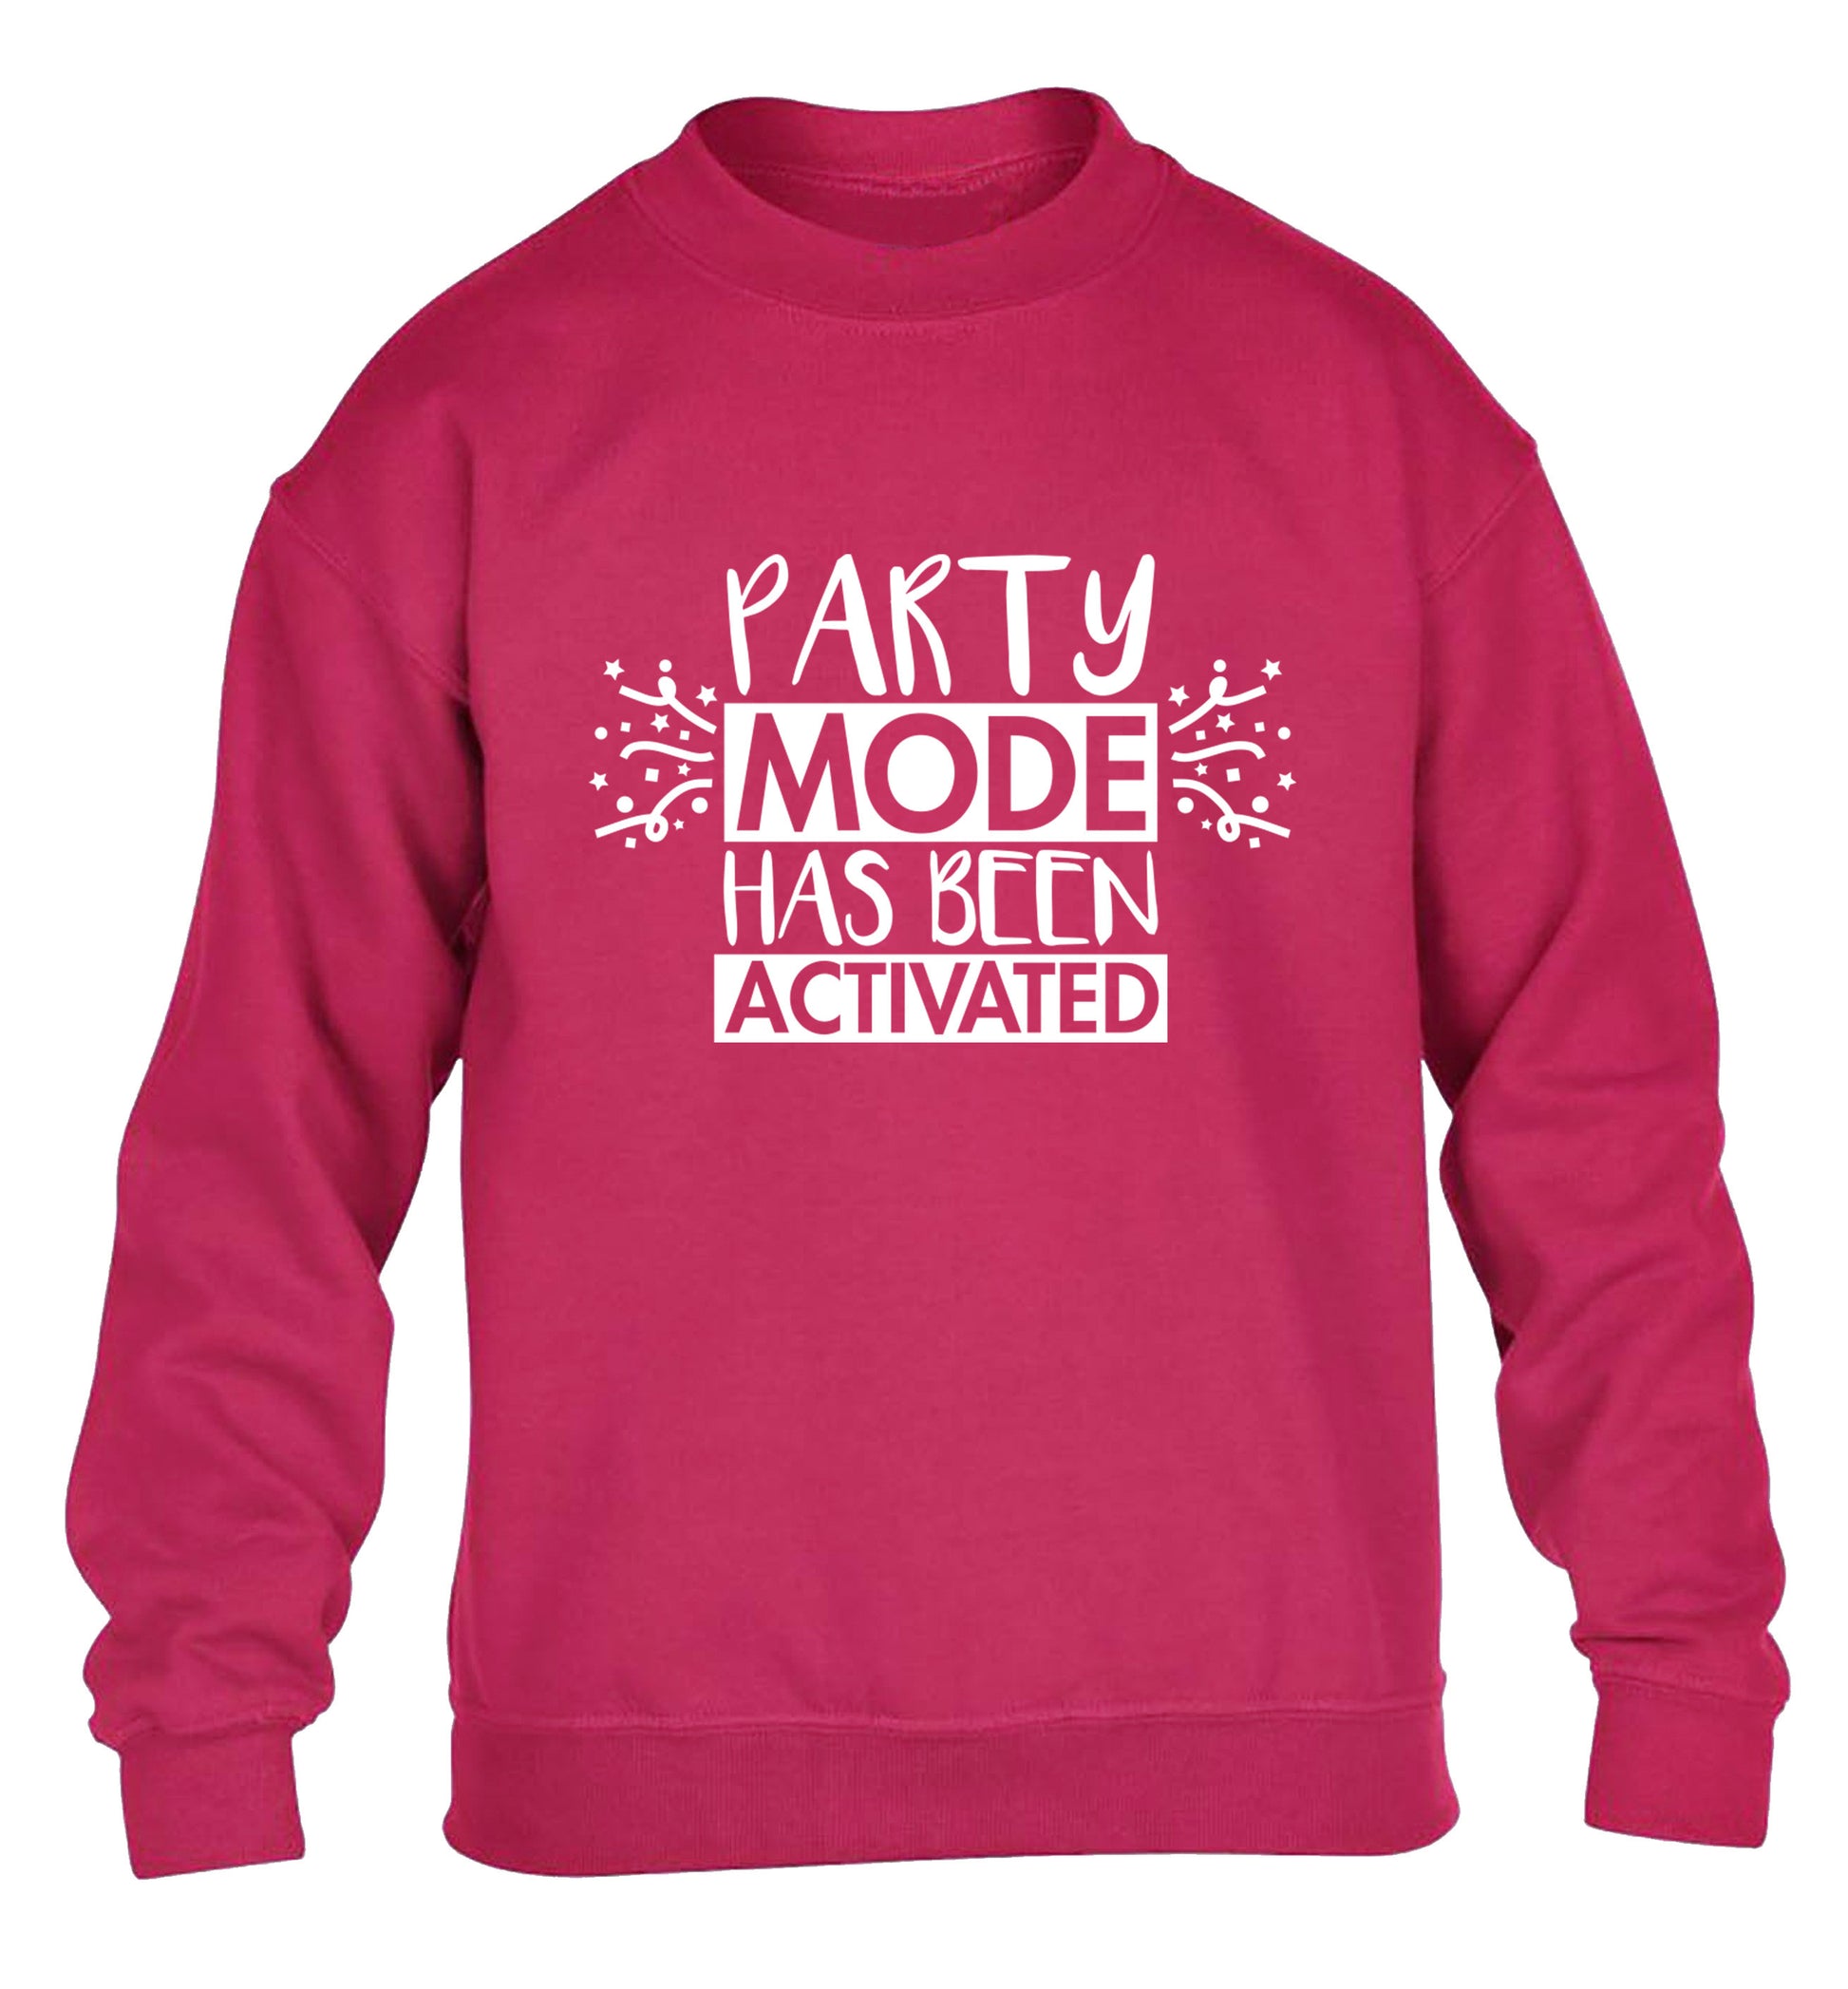 Please do not disturb party mode has been activated children's pink sweater 12-14 Years